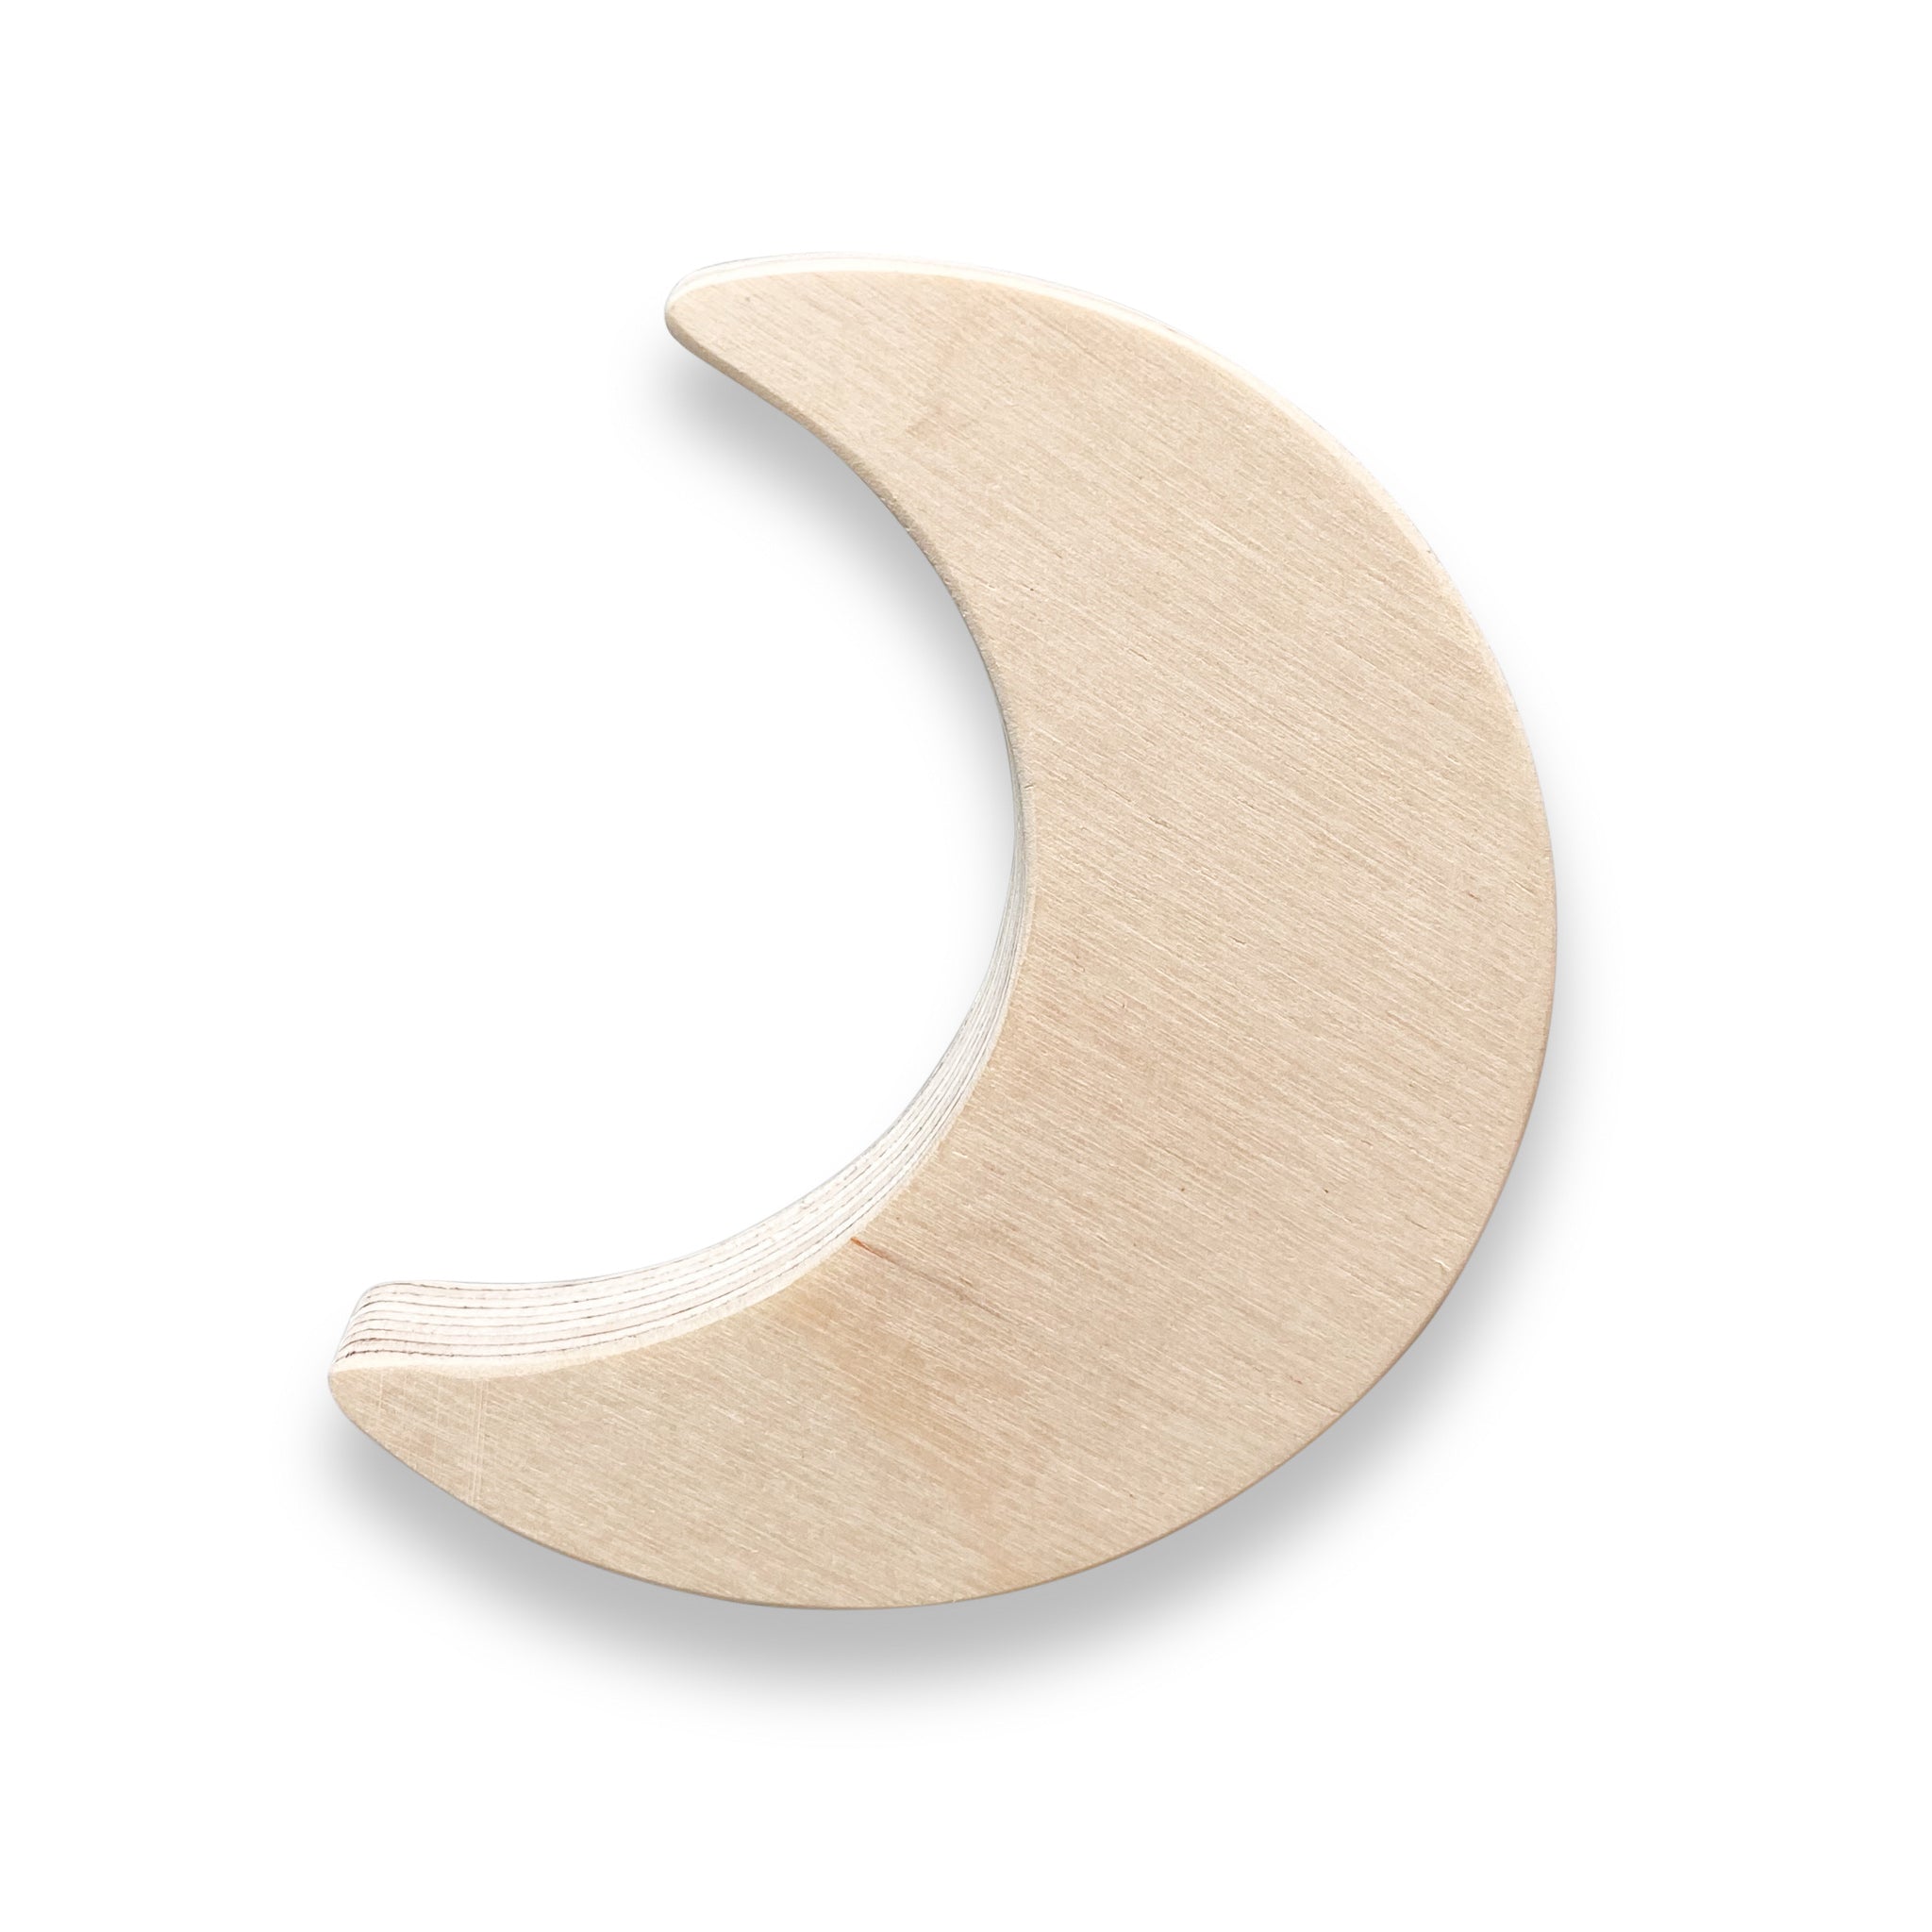 Wooden wall hooks children's room | Star and moon - natural